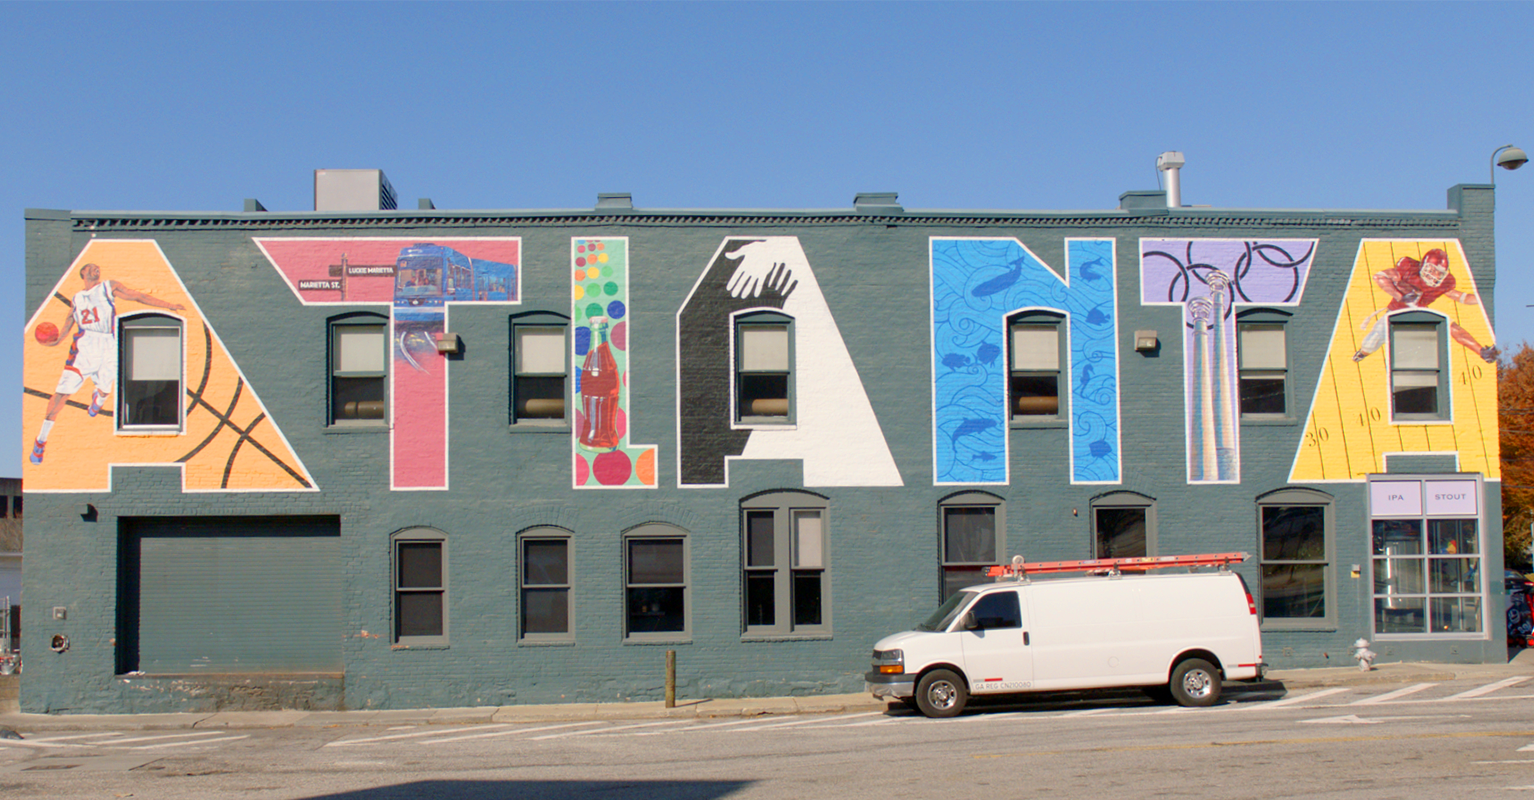 a white van parked in front of a building with colorful graffiti